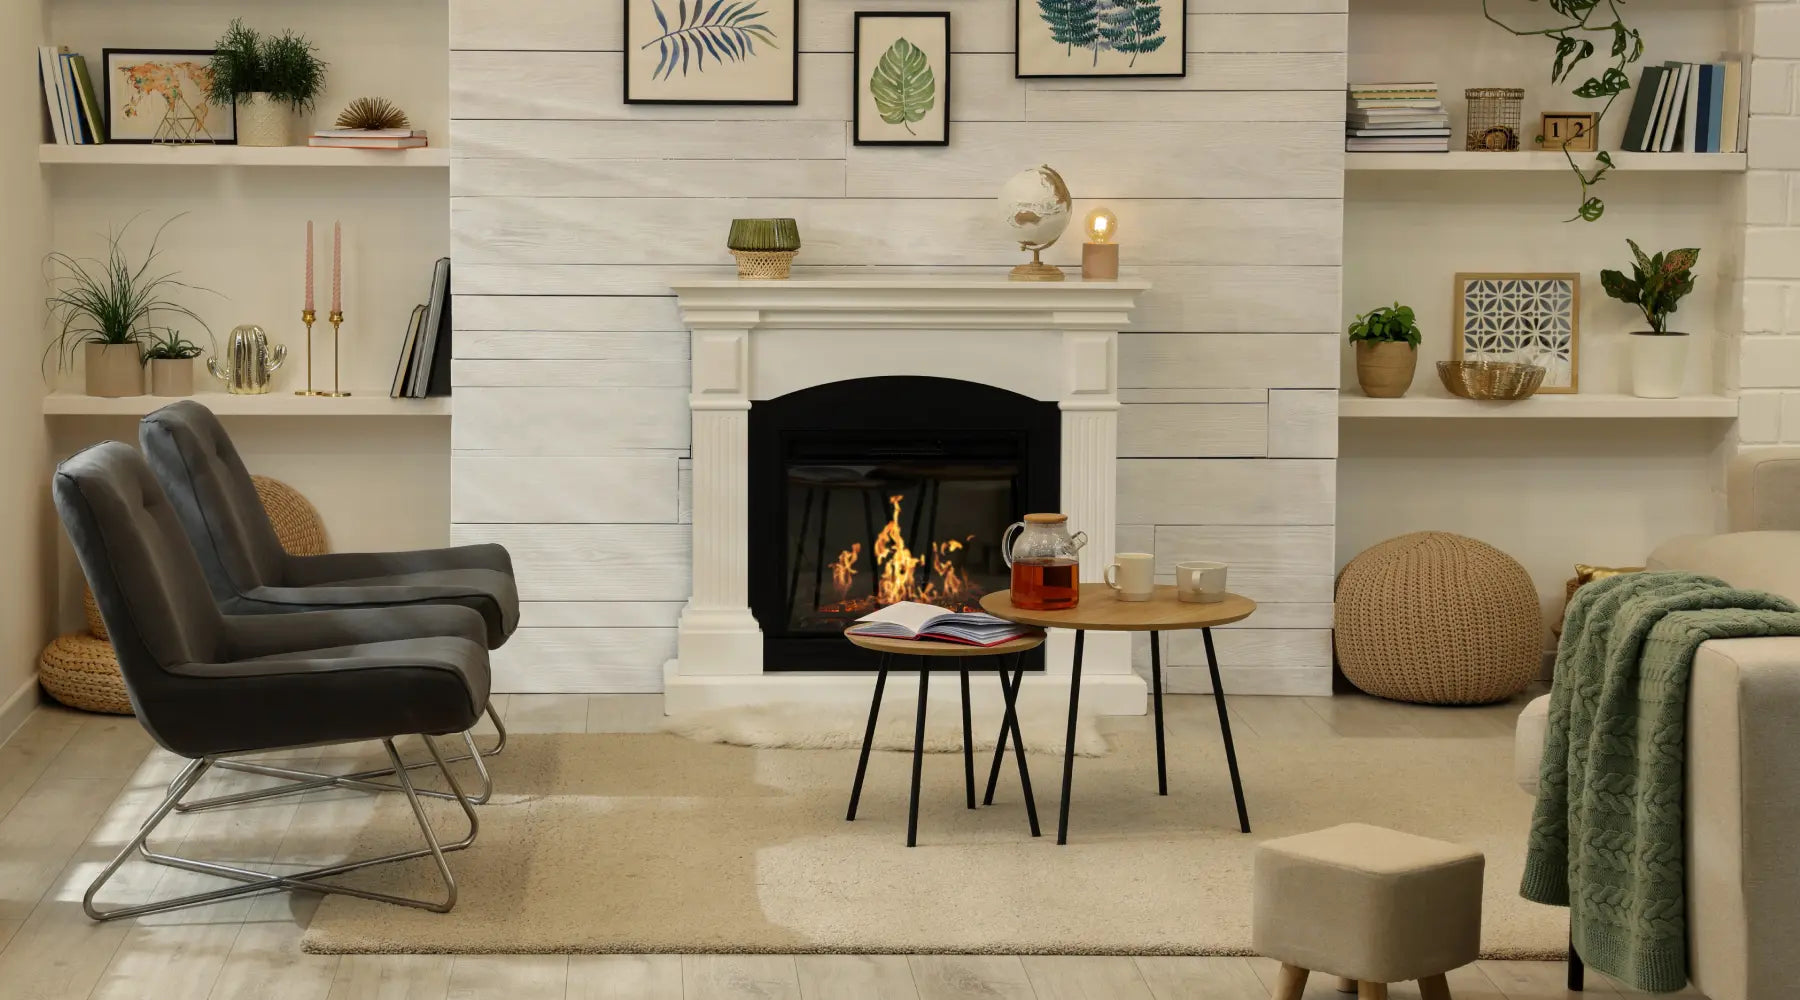 A fireplace safely burns in a peaceful living room.